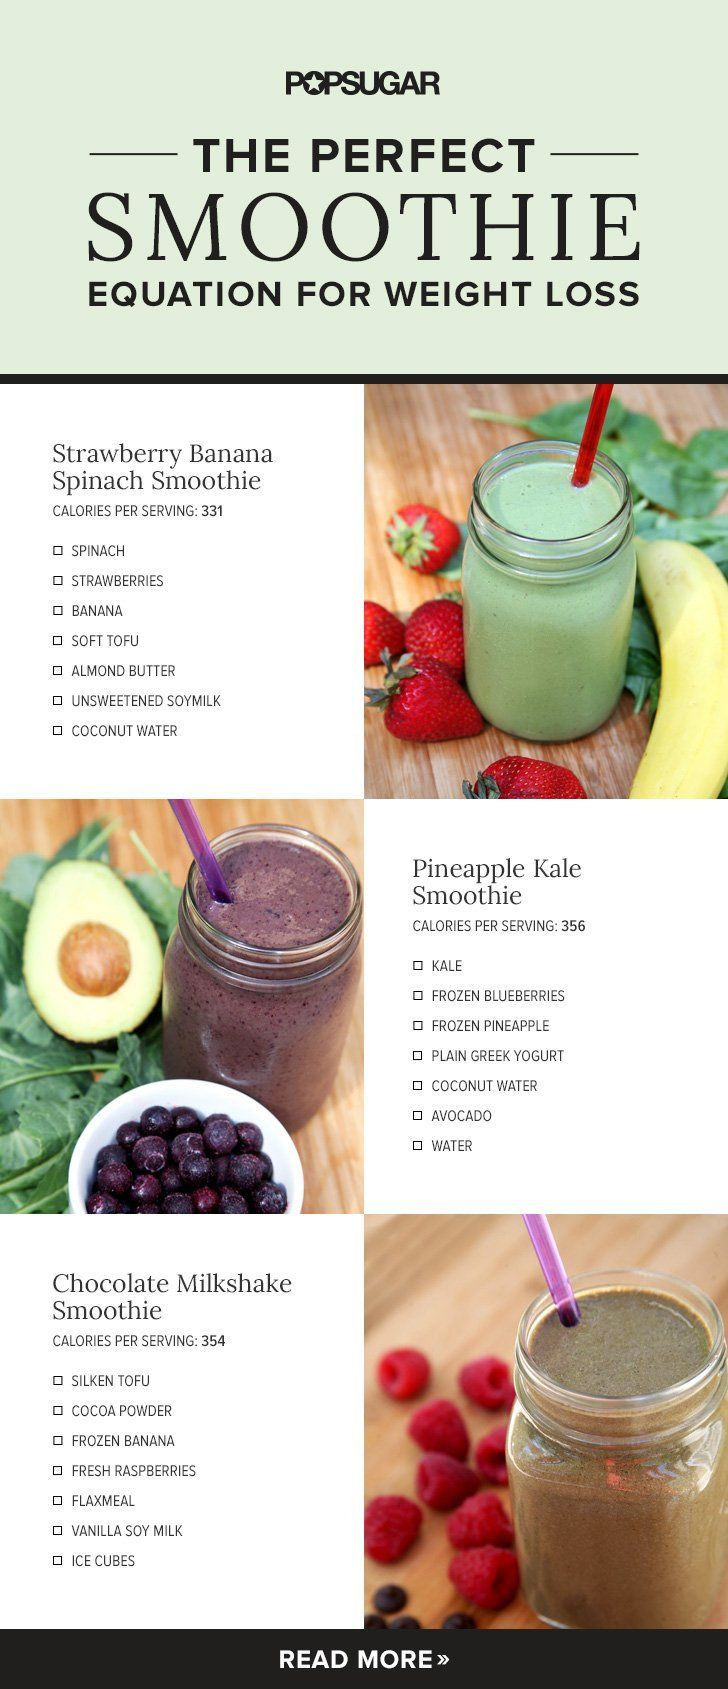 Healthy Smoothie Breakfast
 If You Want to Lose Weight This Is the Smoothie Formula